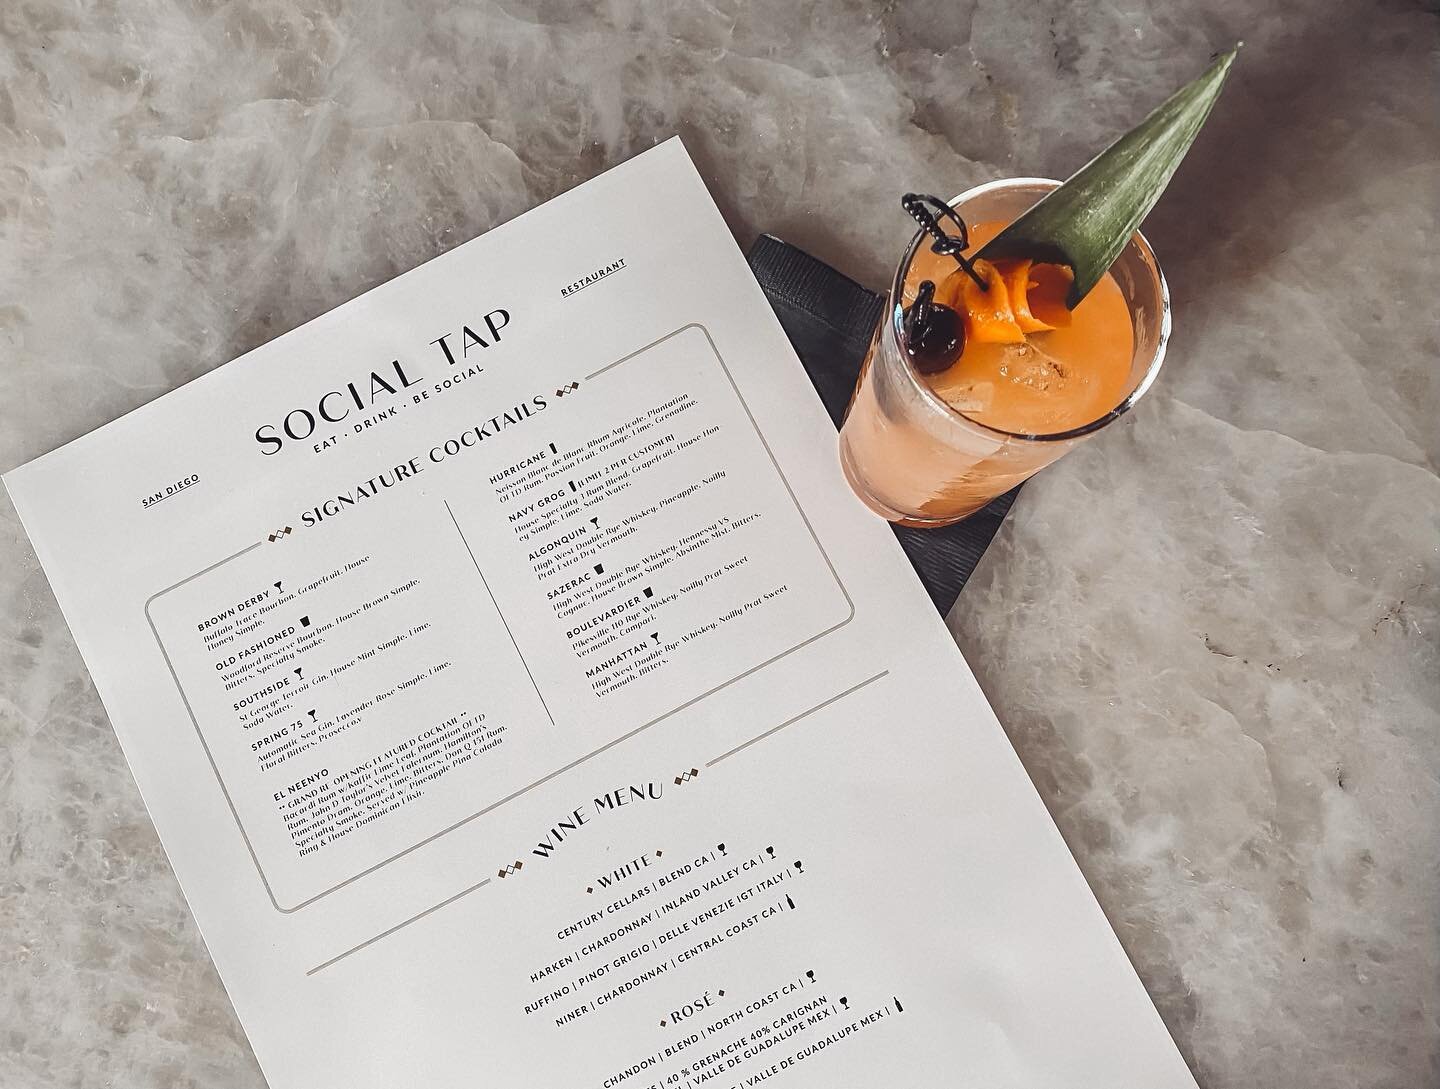 Friday POV. We&rsquo;ll be here all day, in case you need us&hellip;⁠
⁠
Head on over to the link in our bio to book your Friday night with us. We&rsquo;ll be waiting.✨⁠
⁠
#socialtap #eatdrinkbesocial